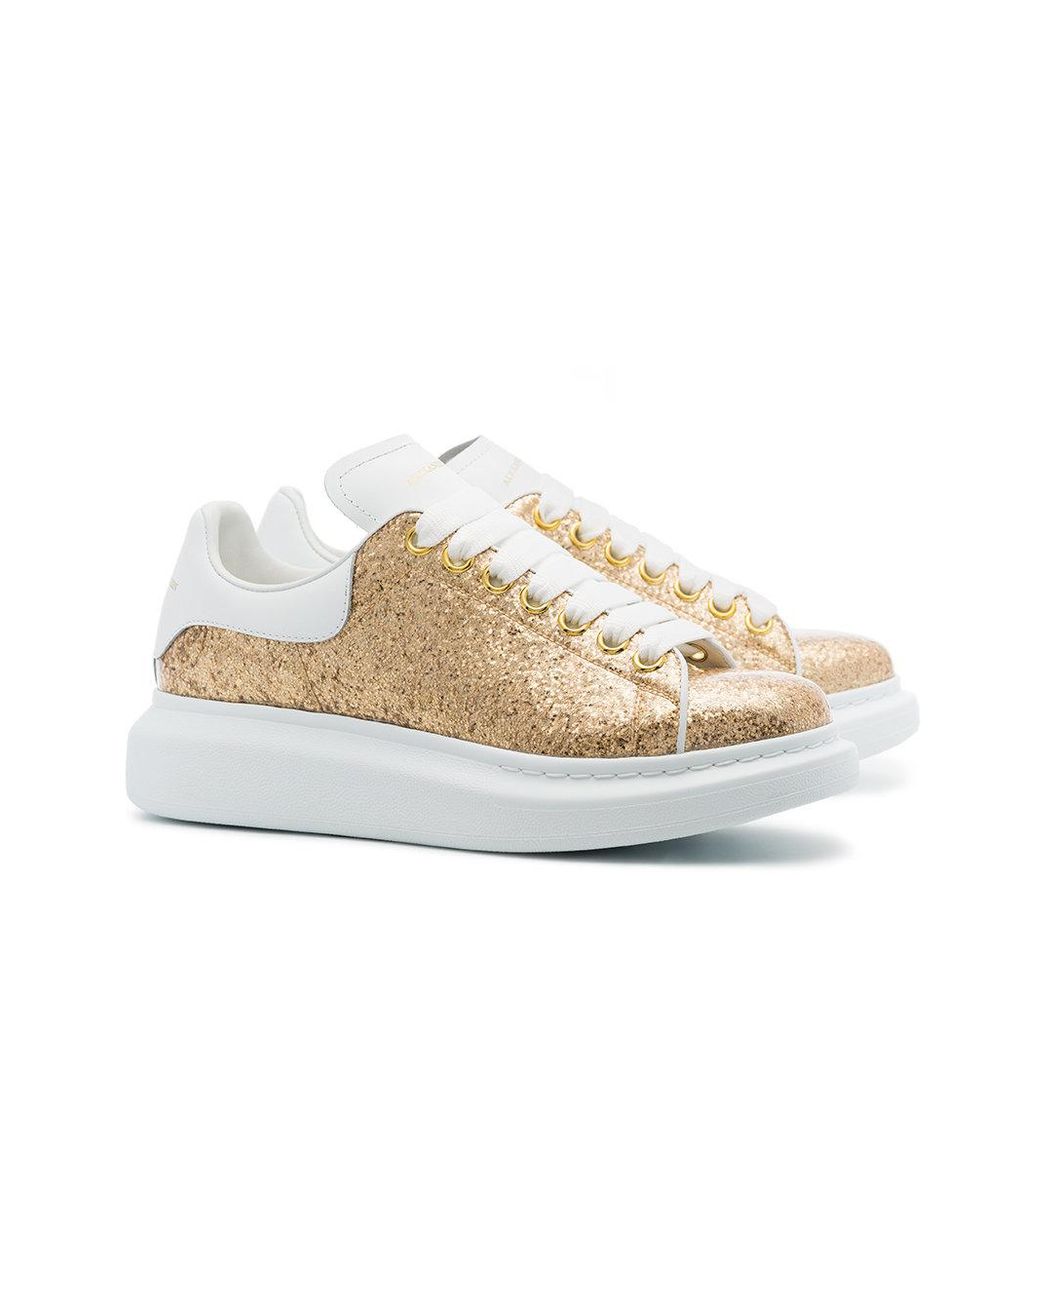 Alexander McQueen Gold Oversized Leather Glitter Sneakers in White | Lyst